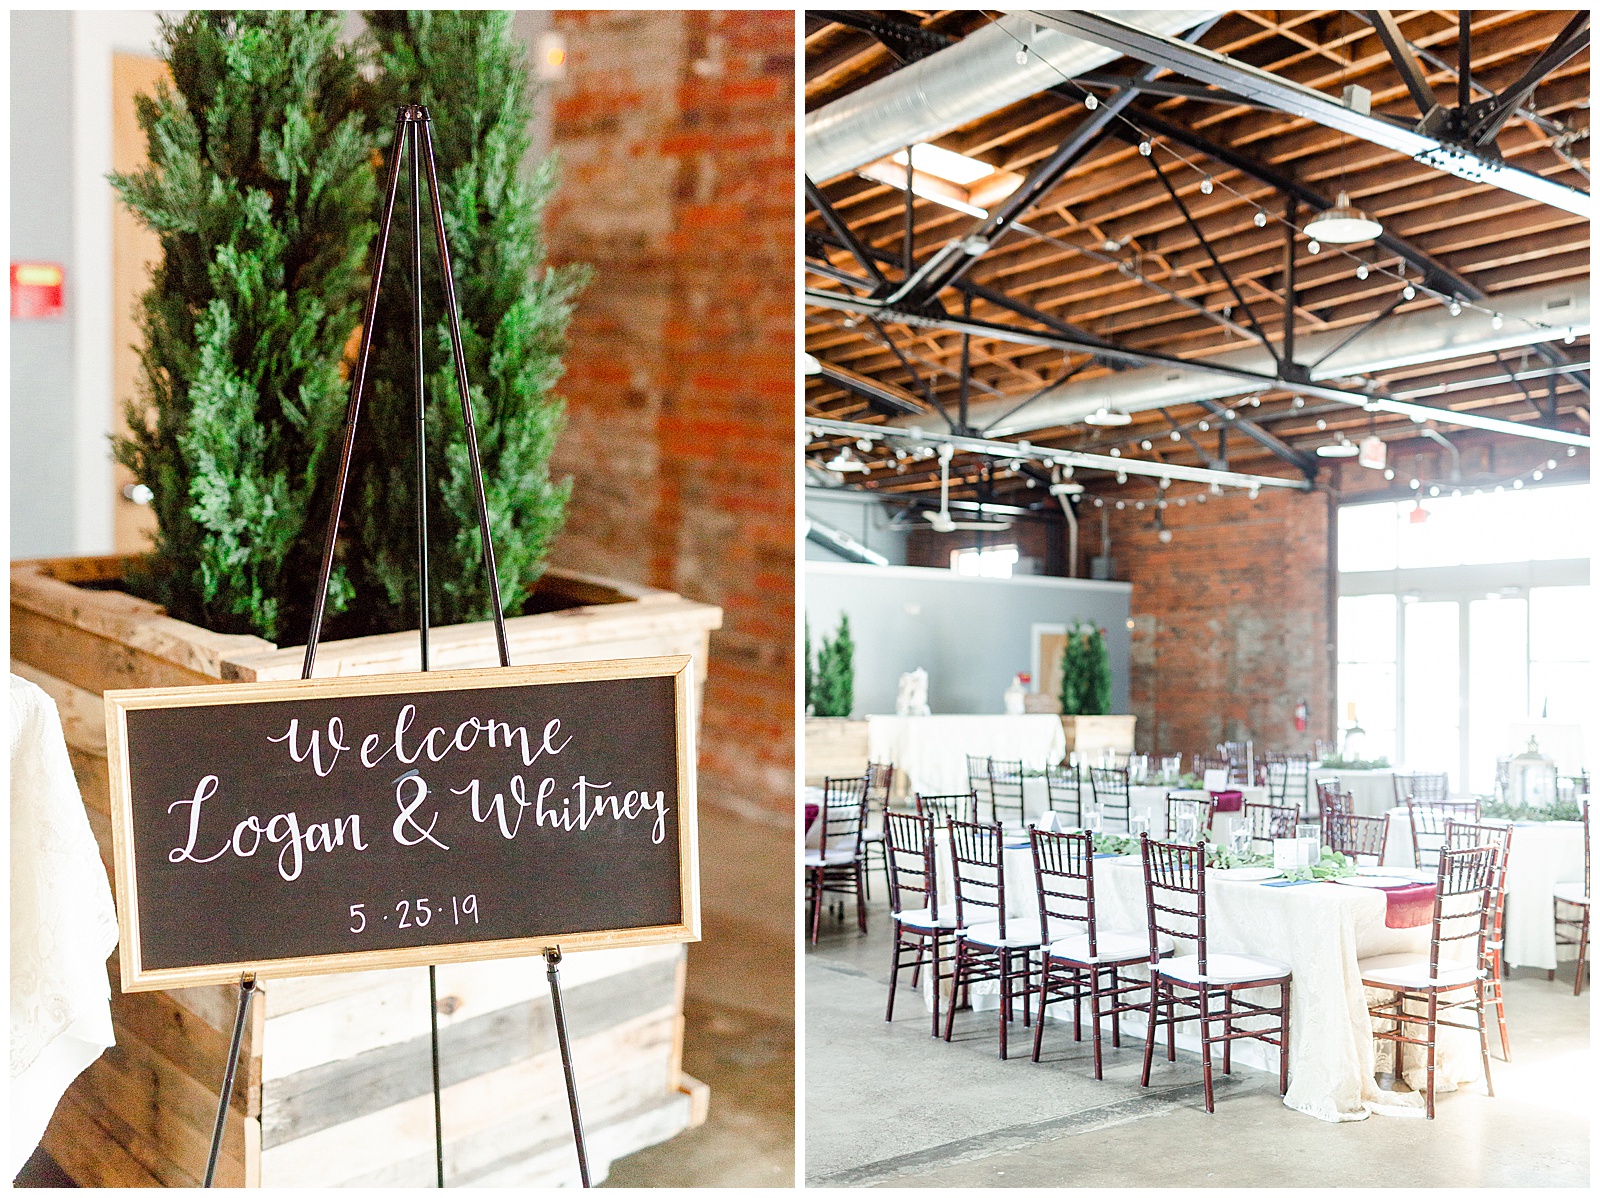 Stunning Indoor Modern Venue with fairy lights and brick building from Summer Wedding in Charlotte, NC | Check out the full wedding at KevynDixonPhoto.com